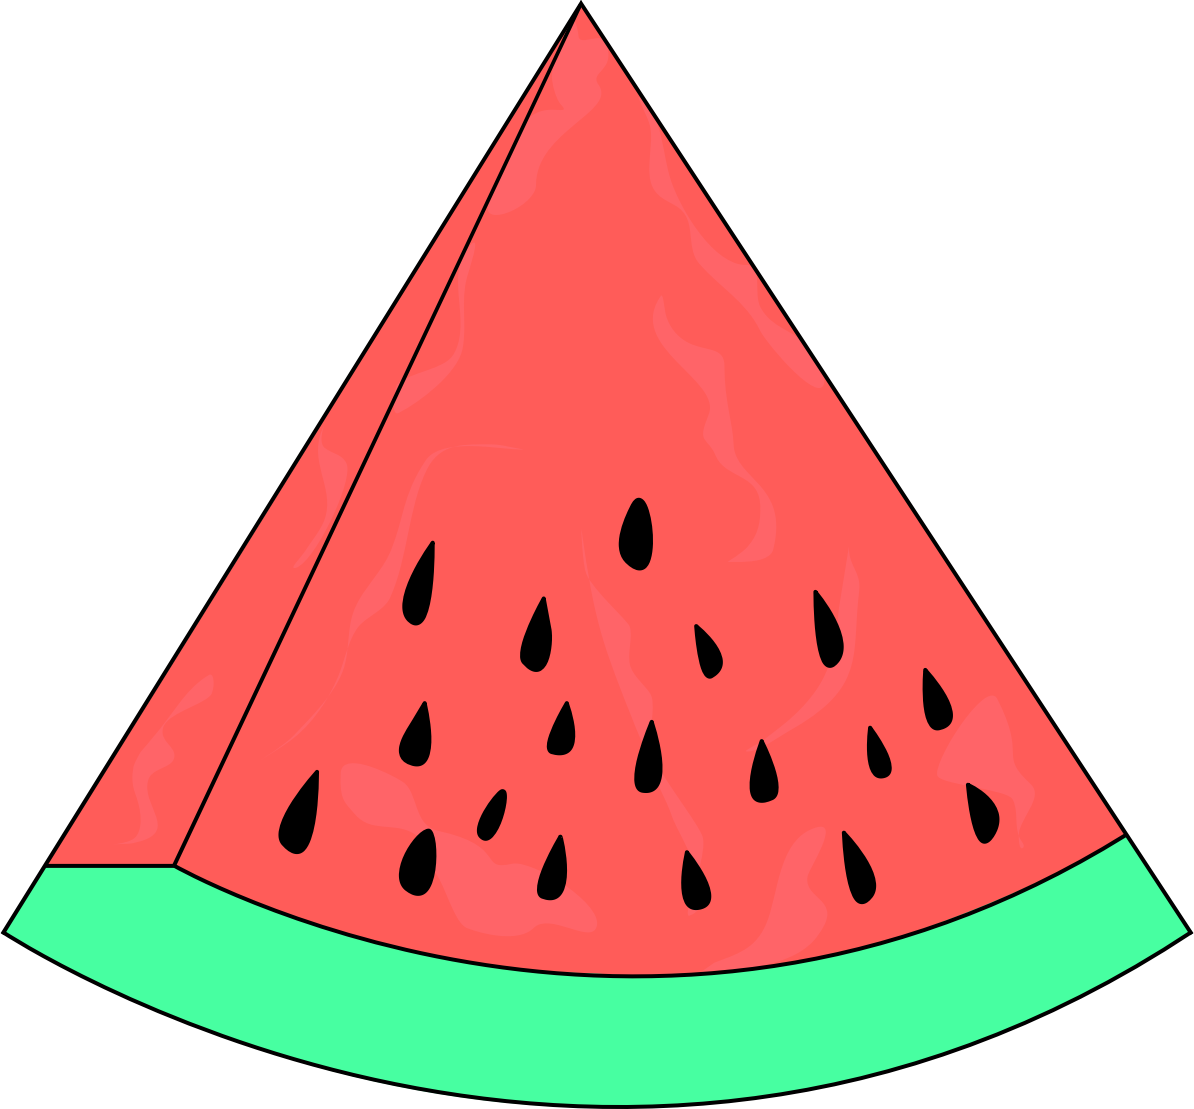 Of watermelon clip art for clipart cliparts for you clipartix